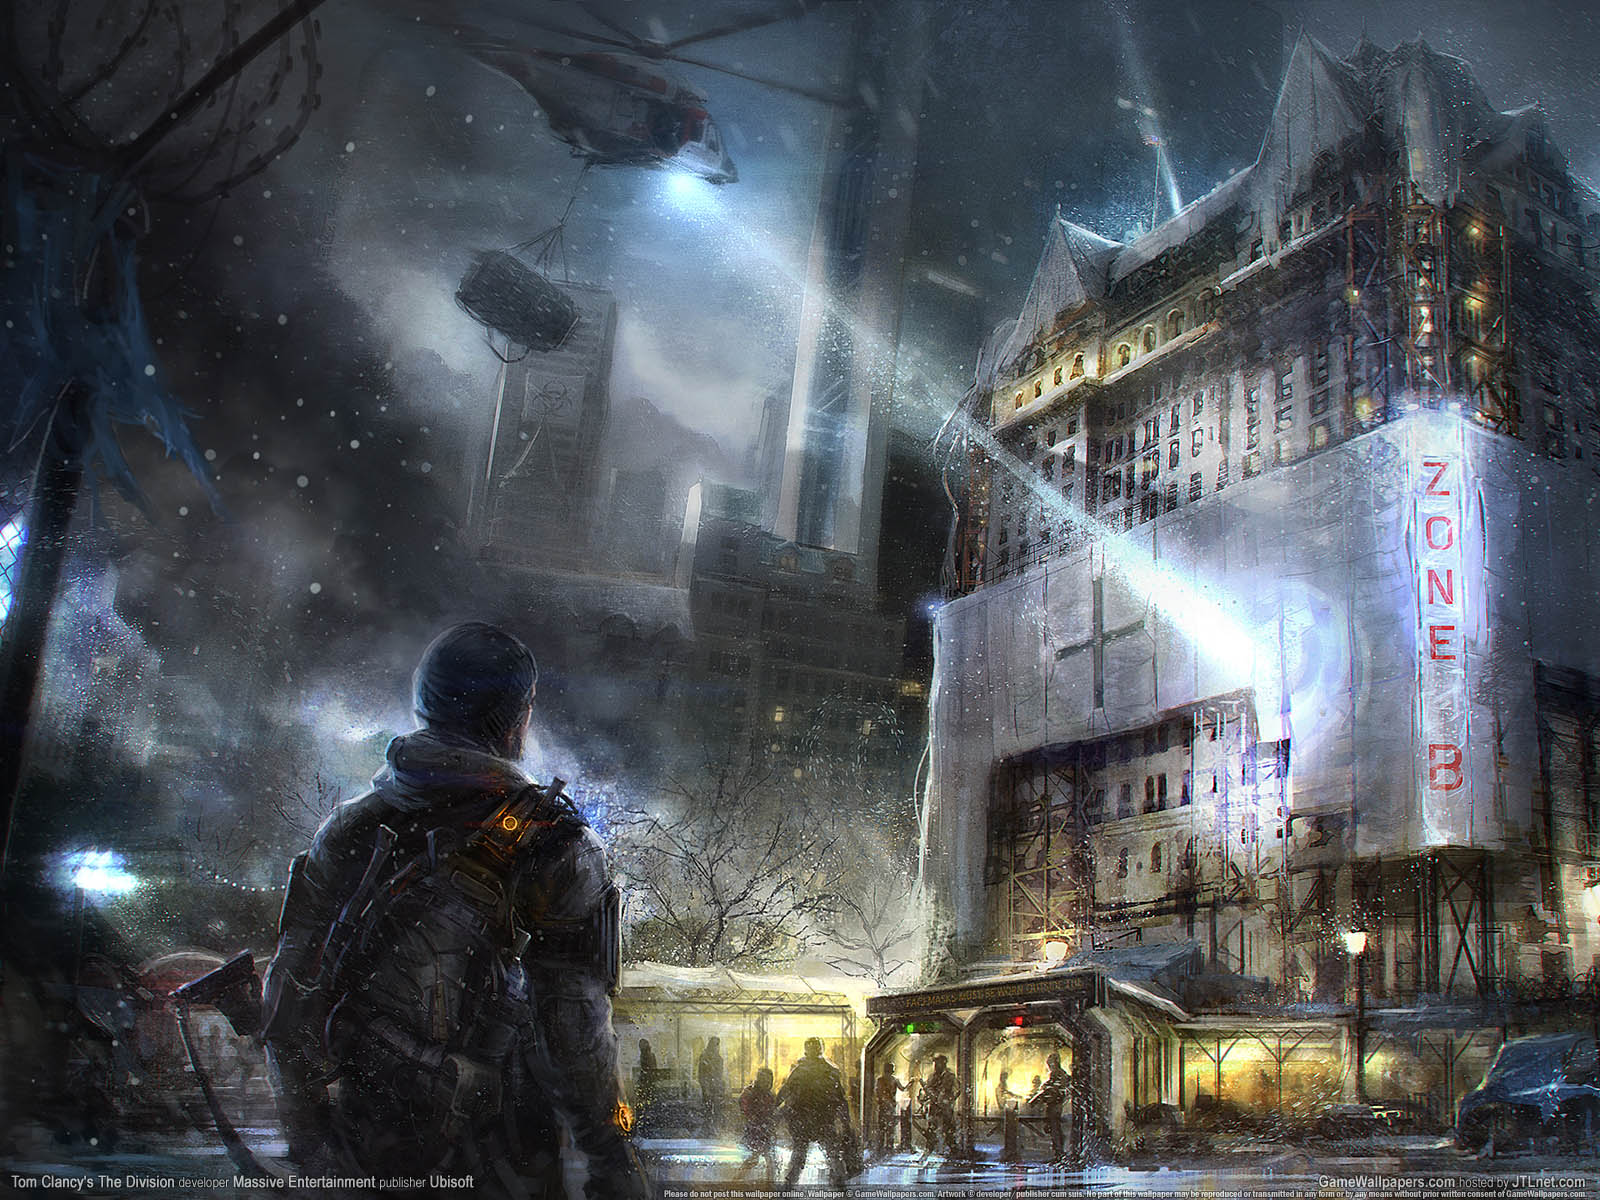 Tom Clancy's The Division achtergrond 01 1600x1200